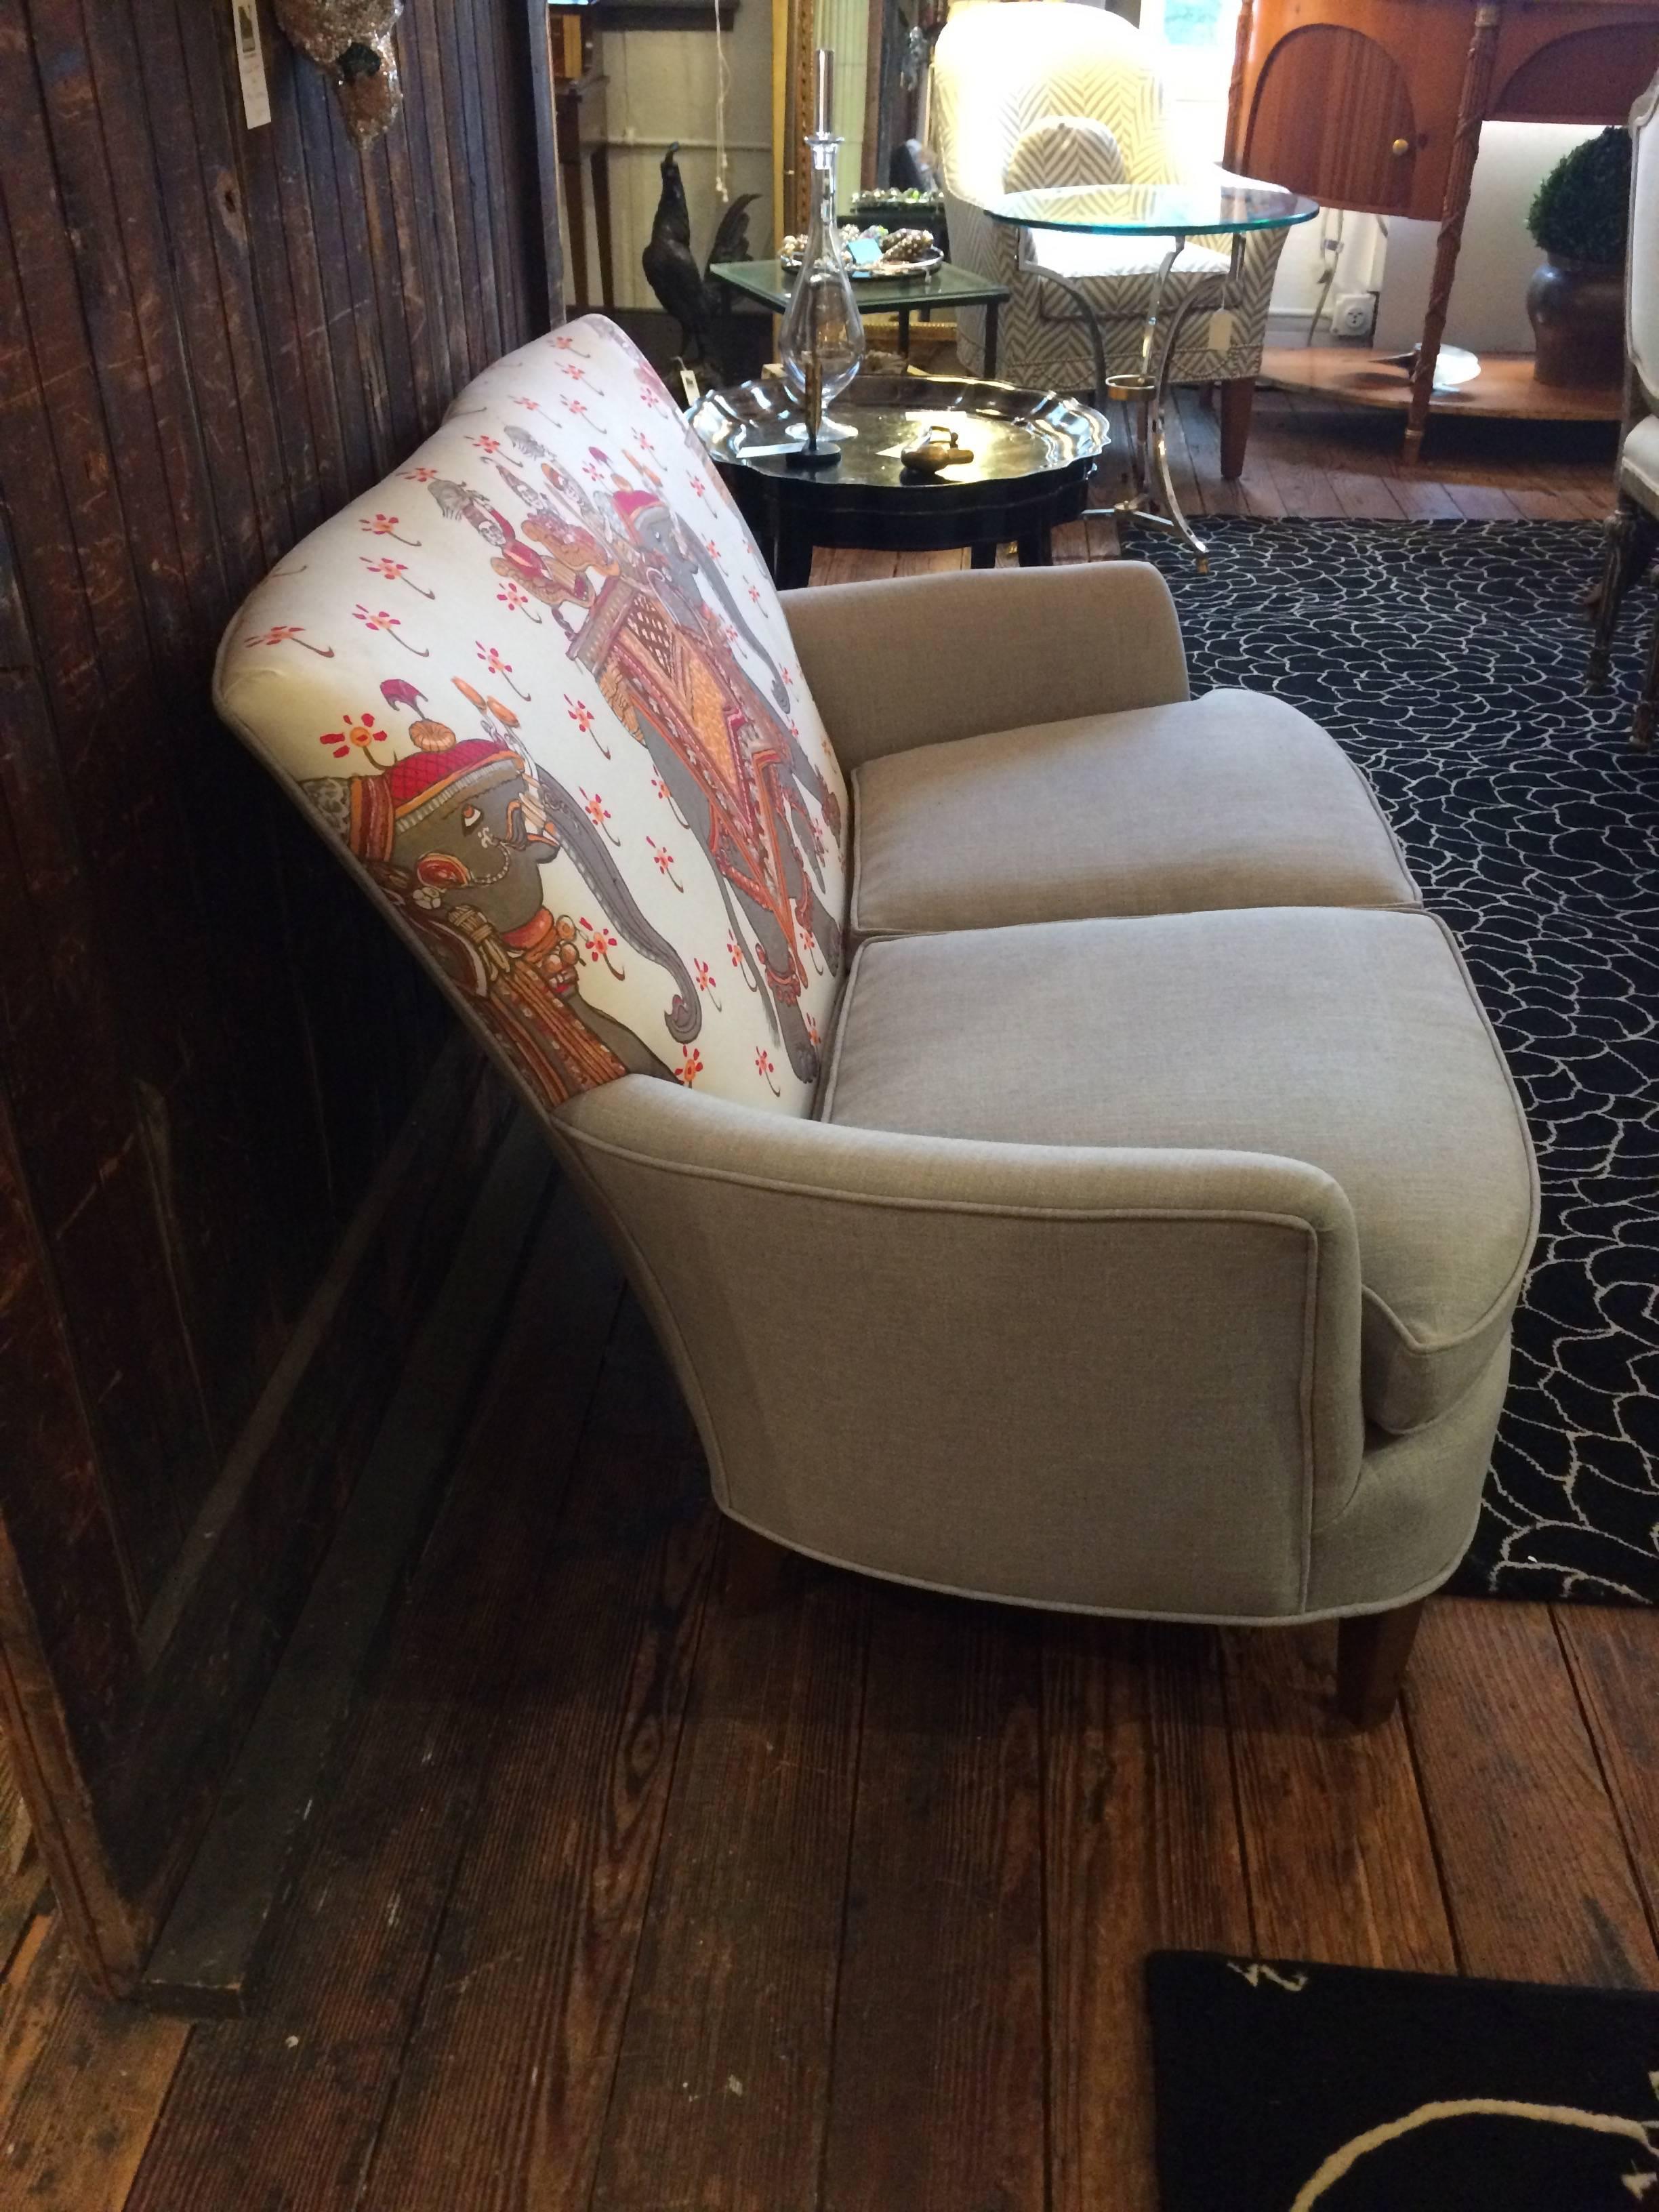 Gem of a sexy low slung antique loveseat from France having mahogany tapered legs and recent neutral grey upholstered seat and fabulous Hermes elephant motif back in cream, grey and orange.